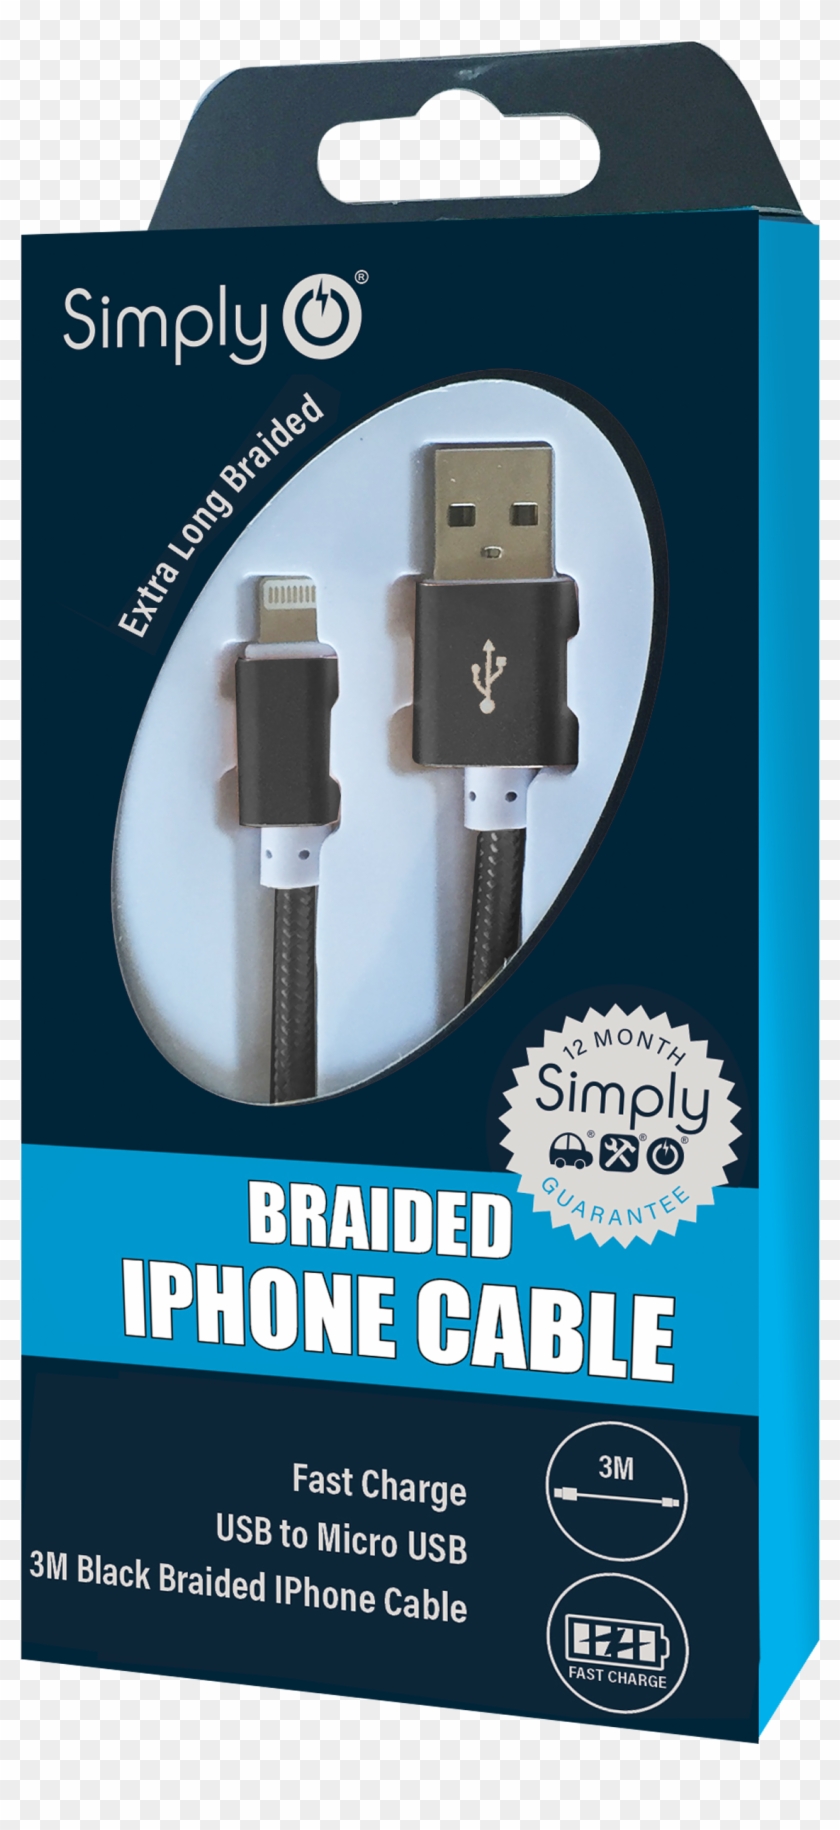 Braided Iphone Cable - Braid Clipart #5900969